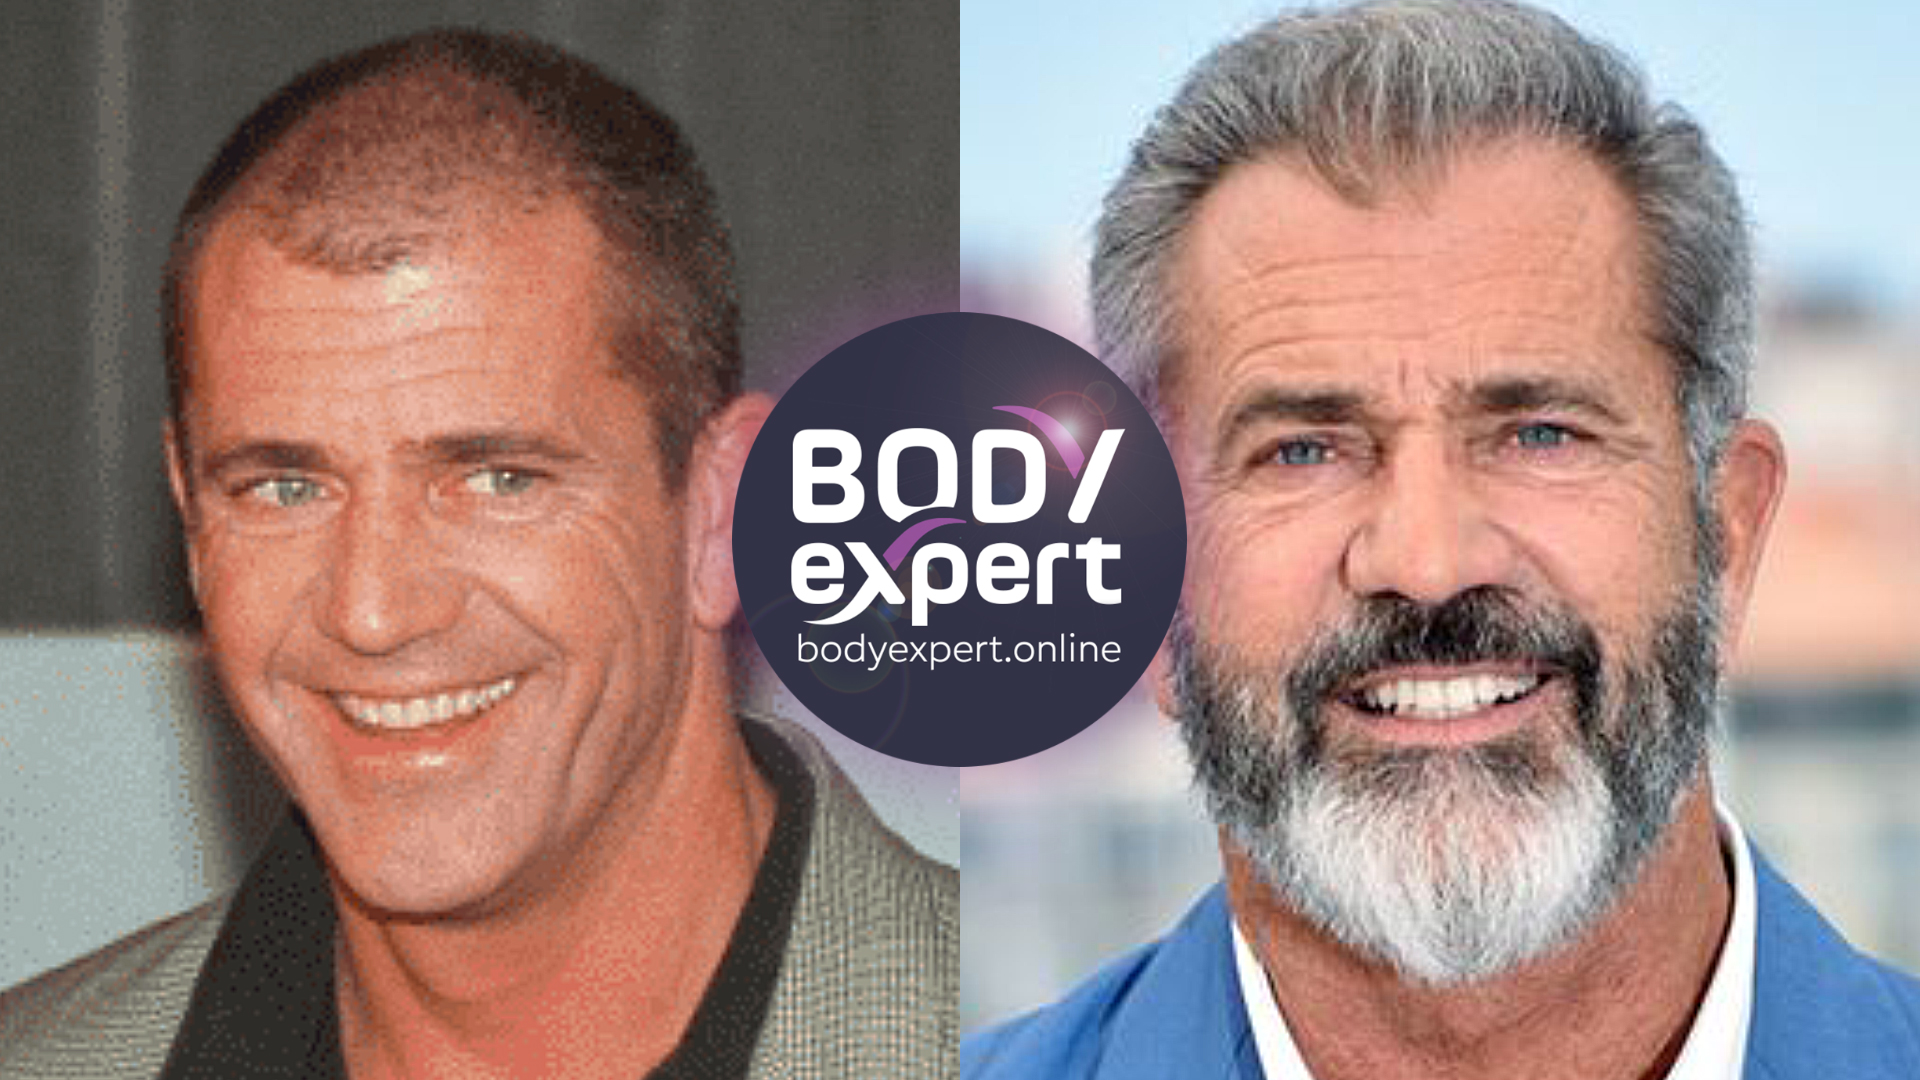 has Mel Gibson had a hair transplant? yes, he cured his androgenetic alopecia in 2007.